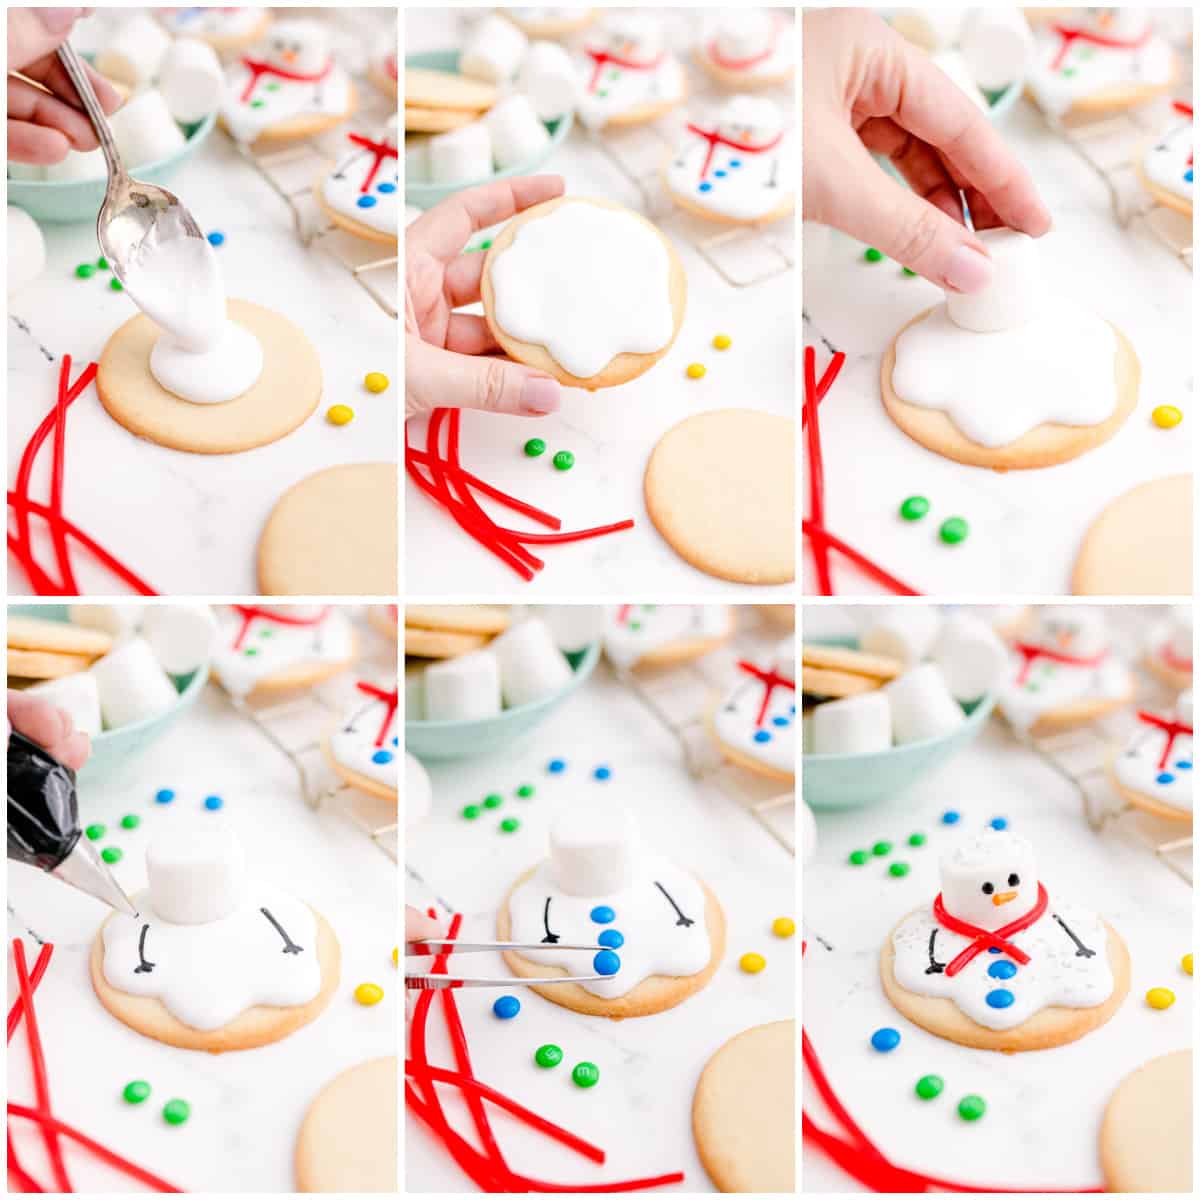 Step by step photos on how to assemble Melted Snowman Cookies.